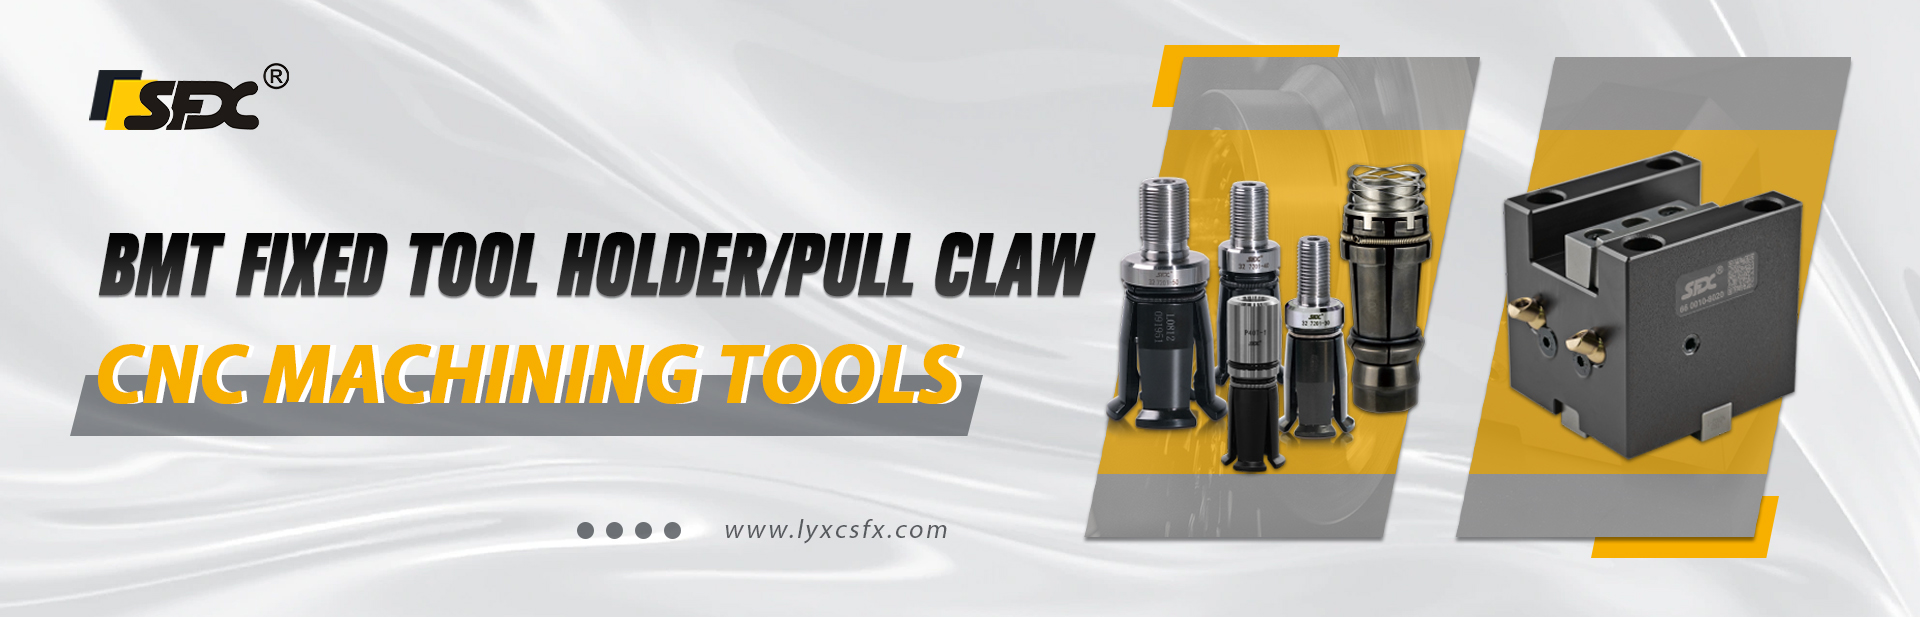 BMT Static Tool Holders / Spindle Pull Claw Supplier